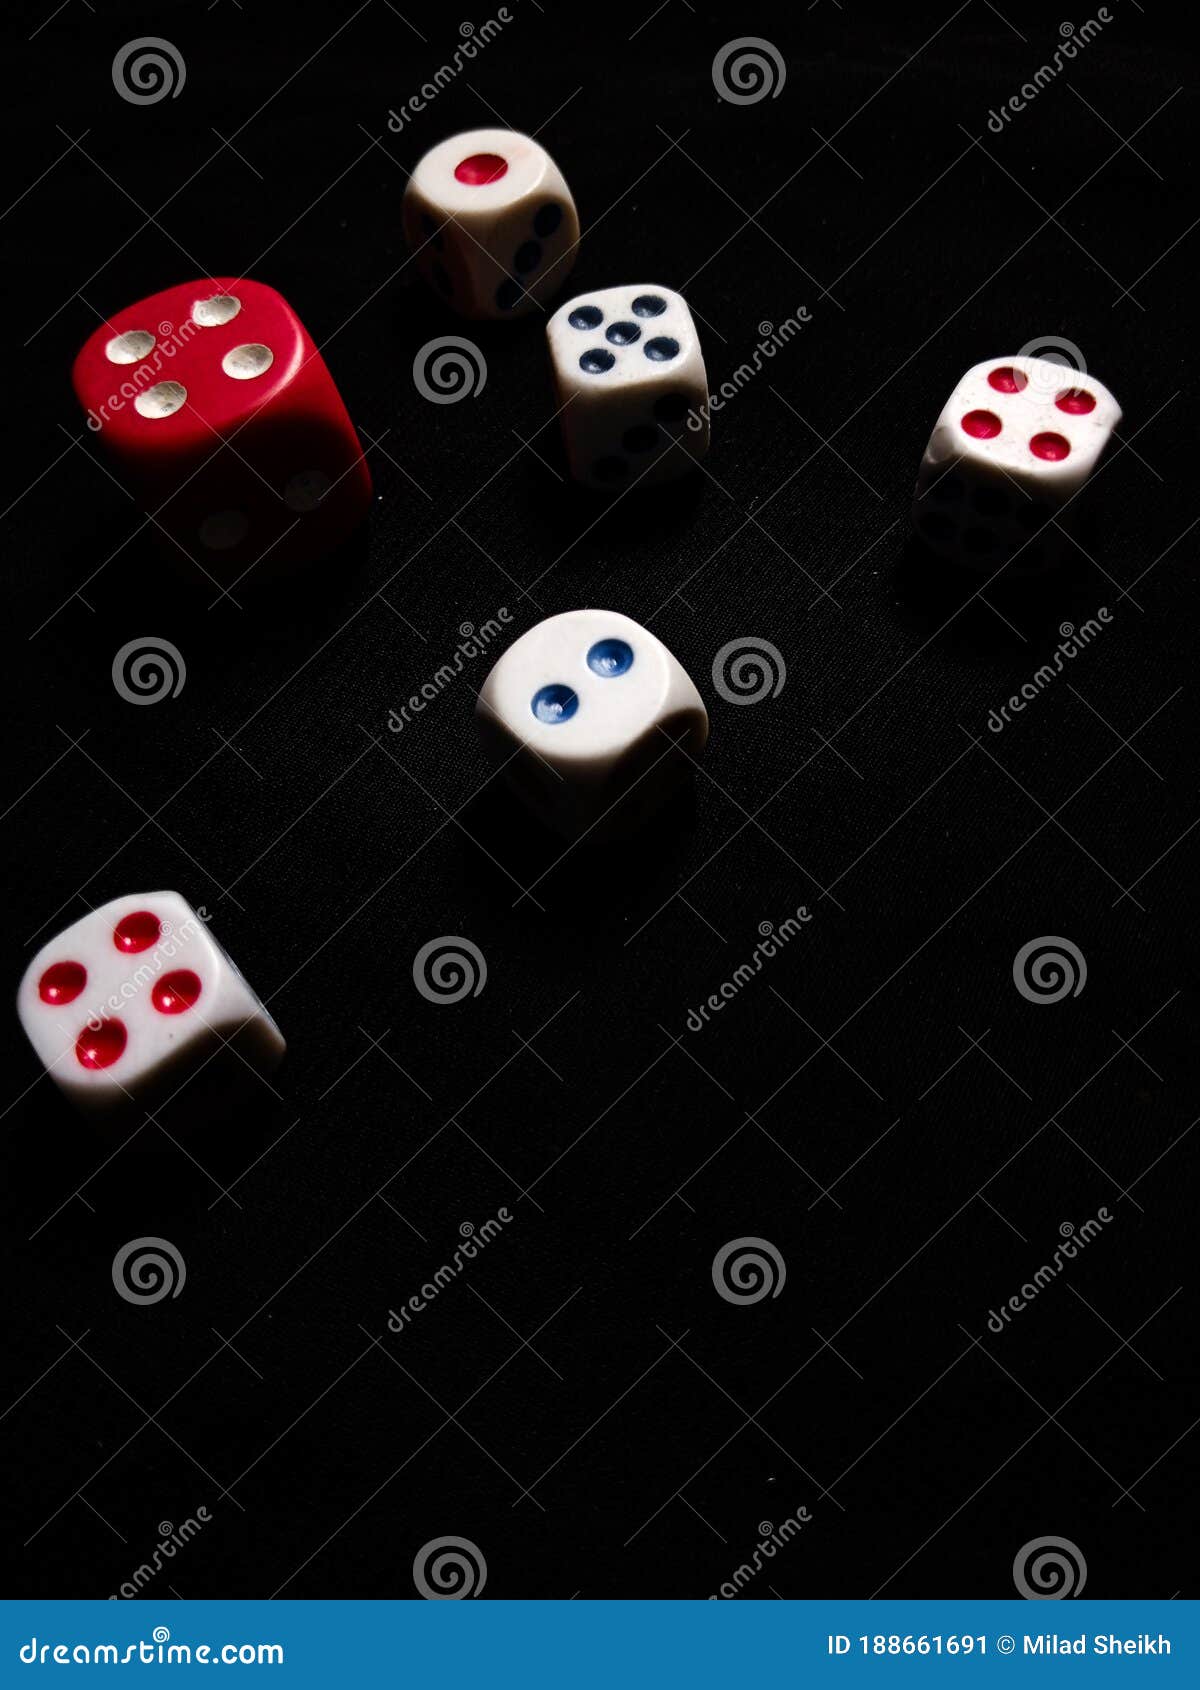 Ludo dice stock image. Image of number, games, chess - 188661691